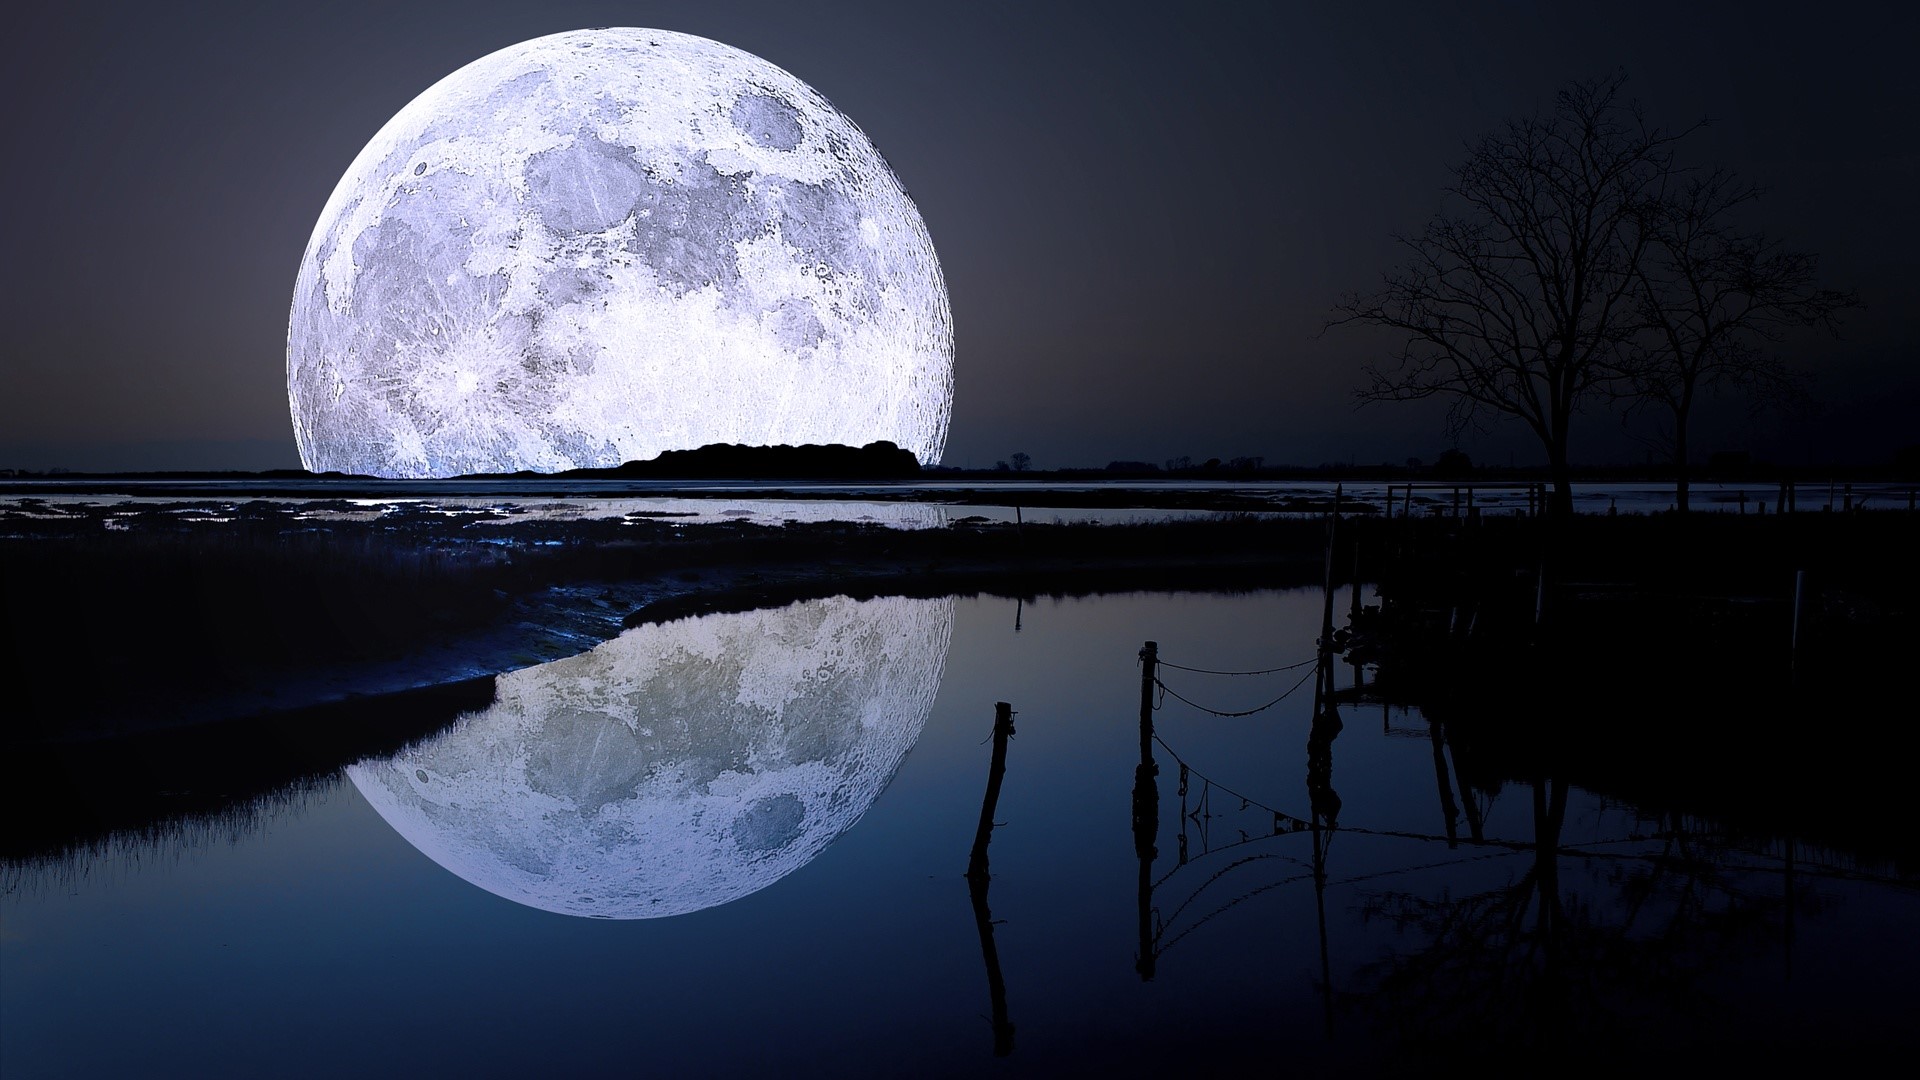 Cool Moon Wallpapers